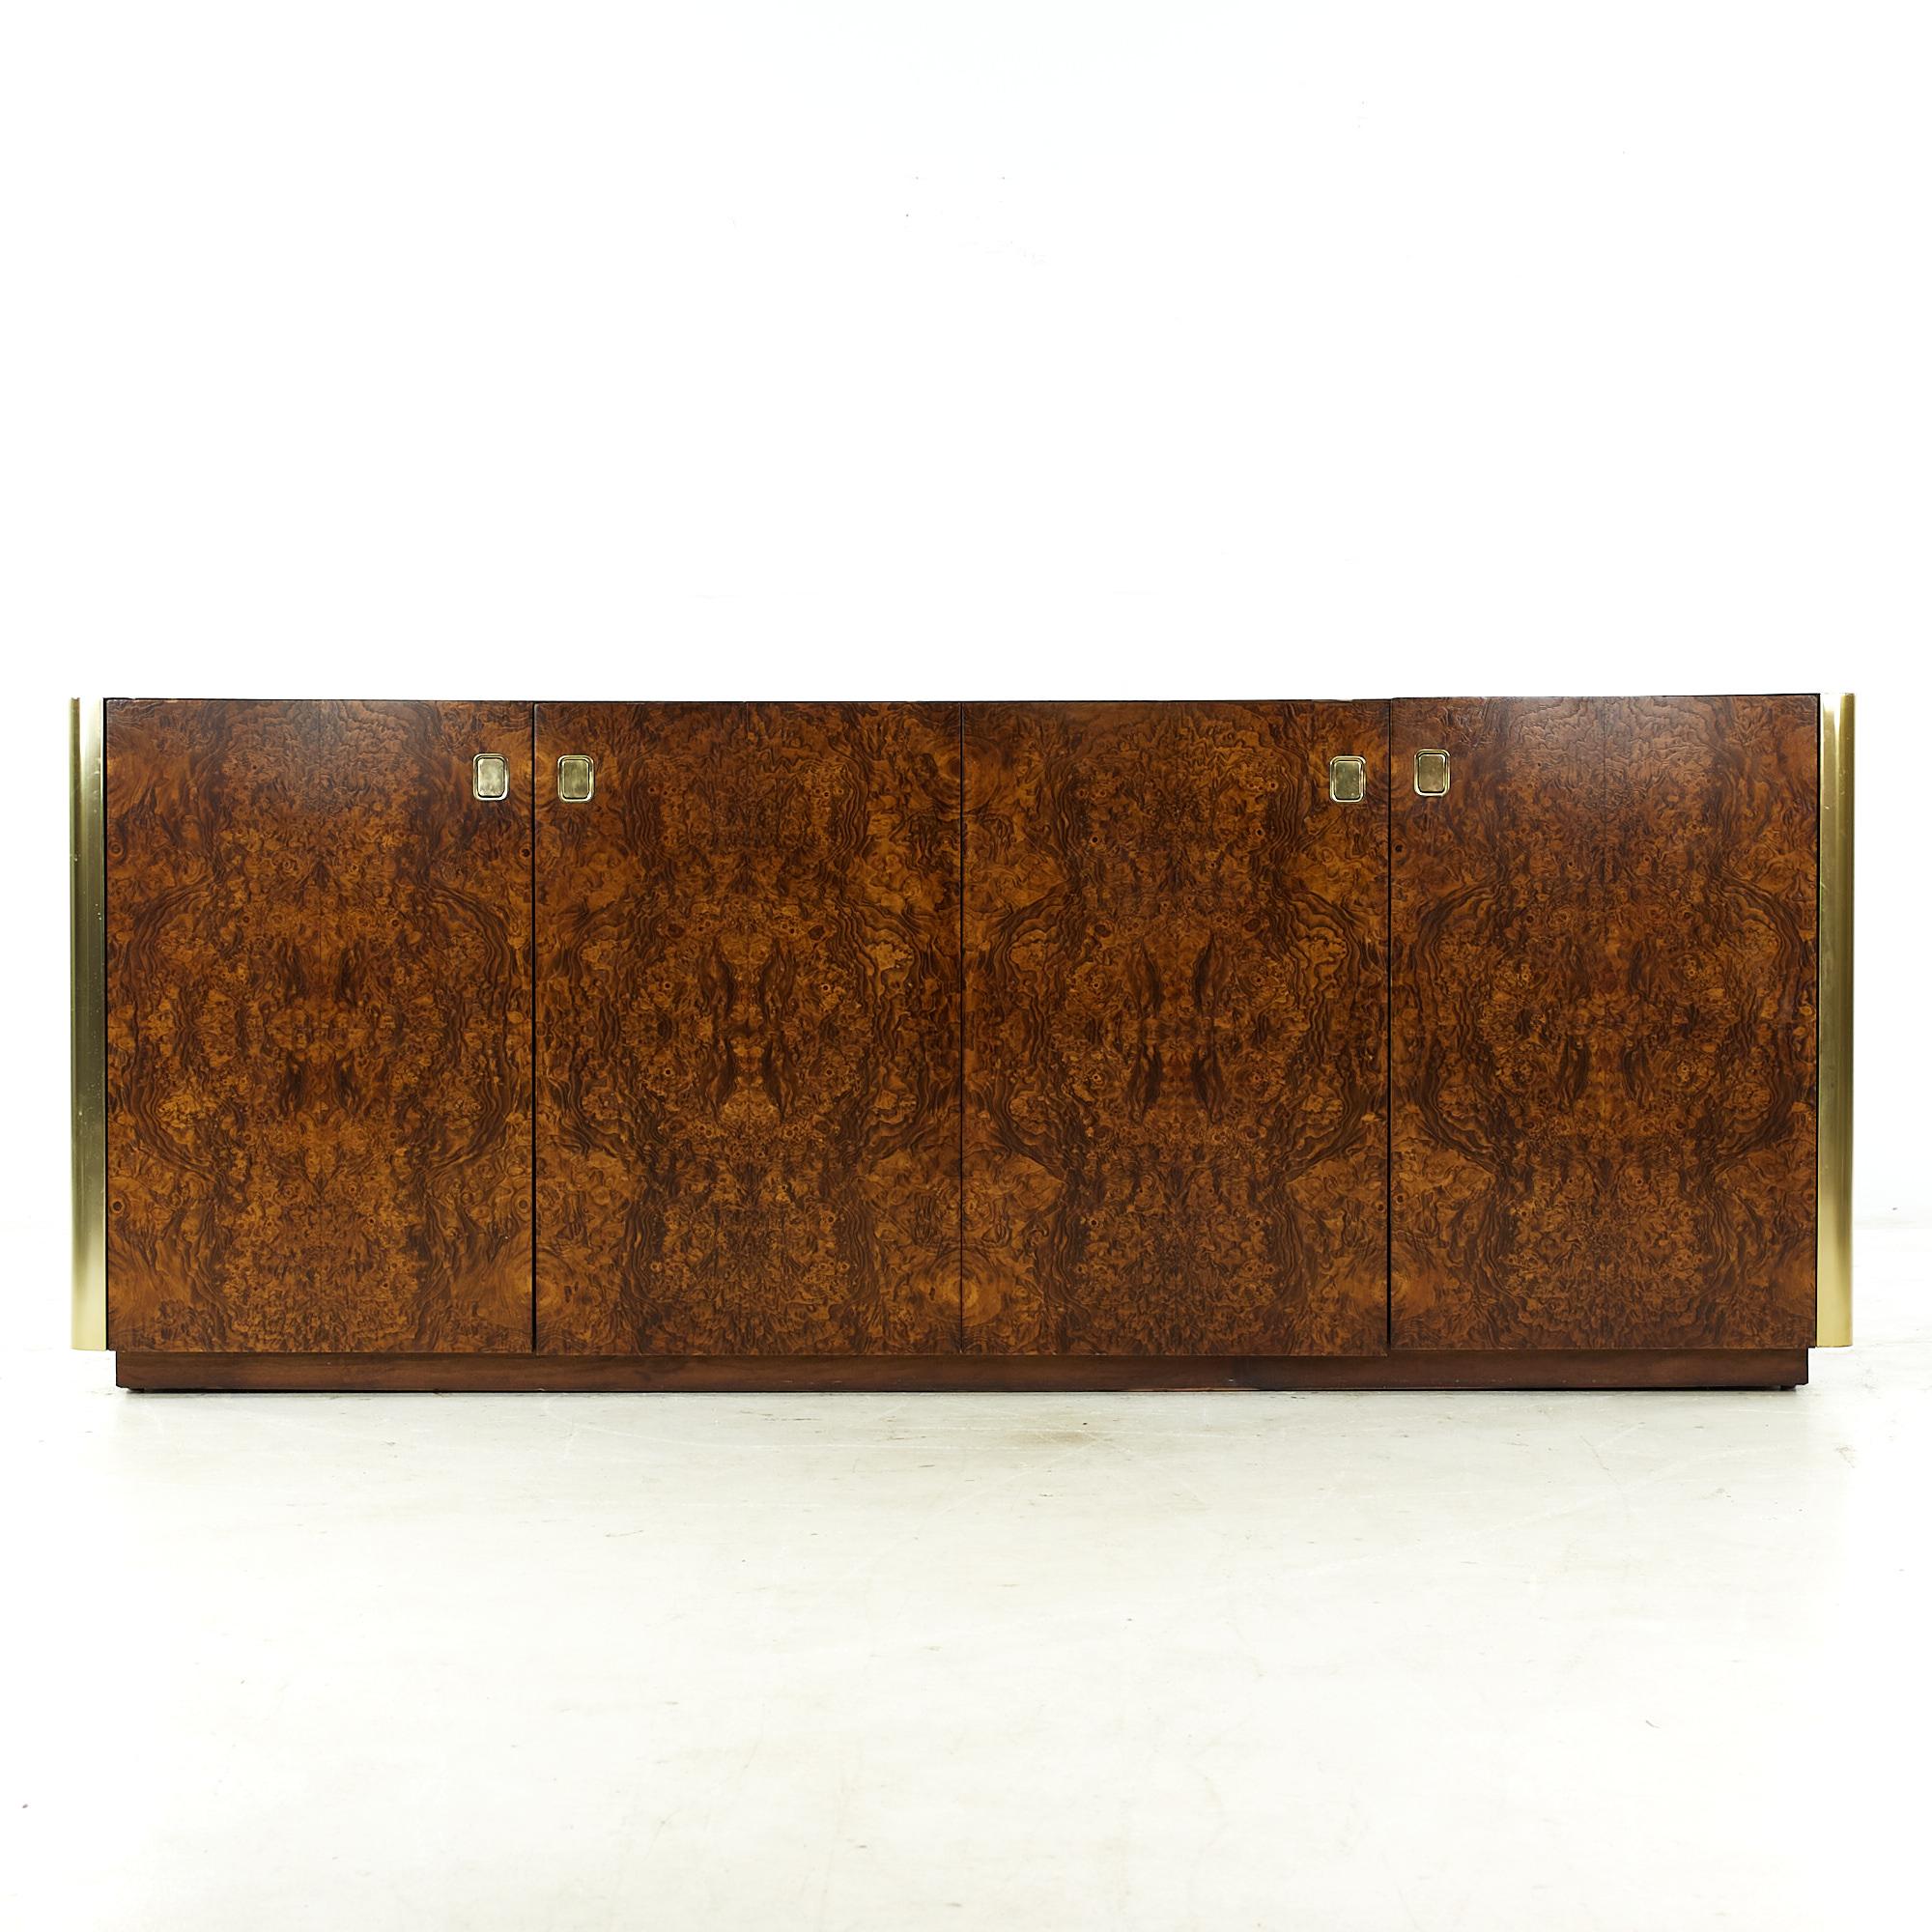 Century Mid Century Burlwood and brass 4 door credenza

This credenza measures: 76.25 wide x 18.25 deep x 30 inches high

All pieces of furniture can be had in what we call restored vintage condition. That means the piece is restored upon